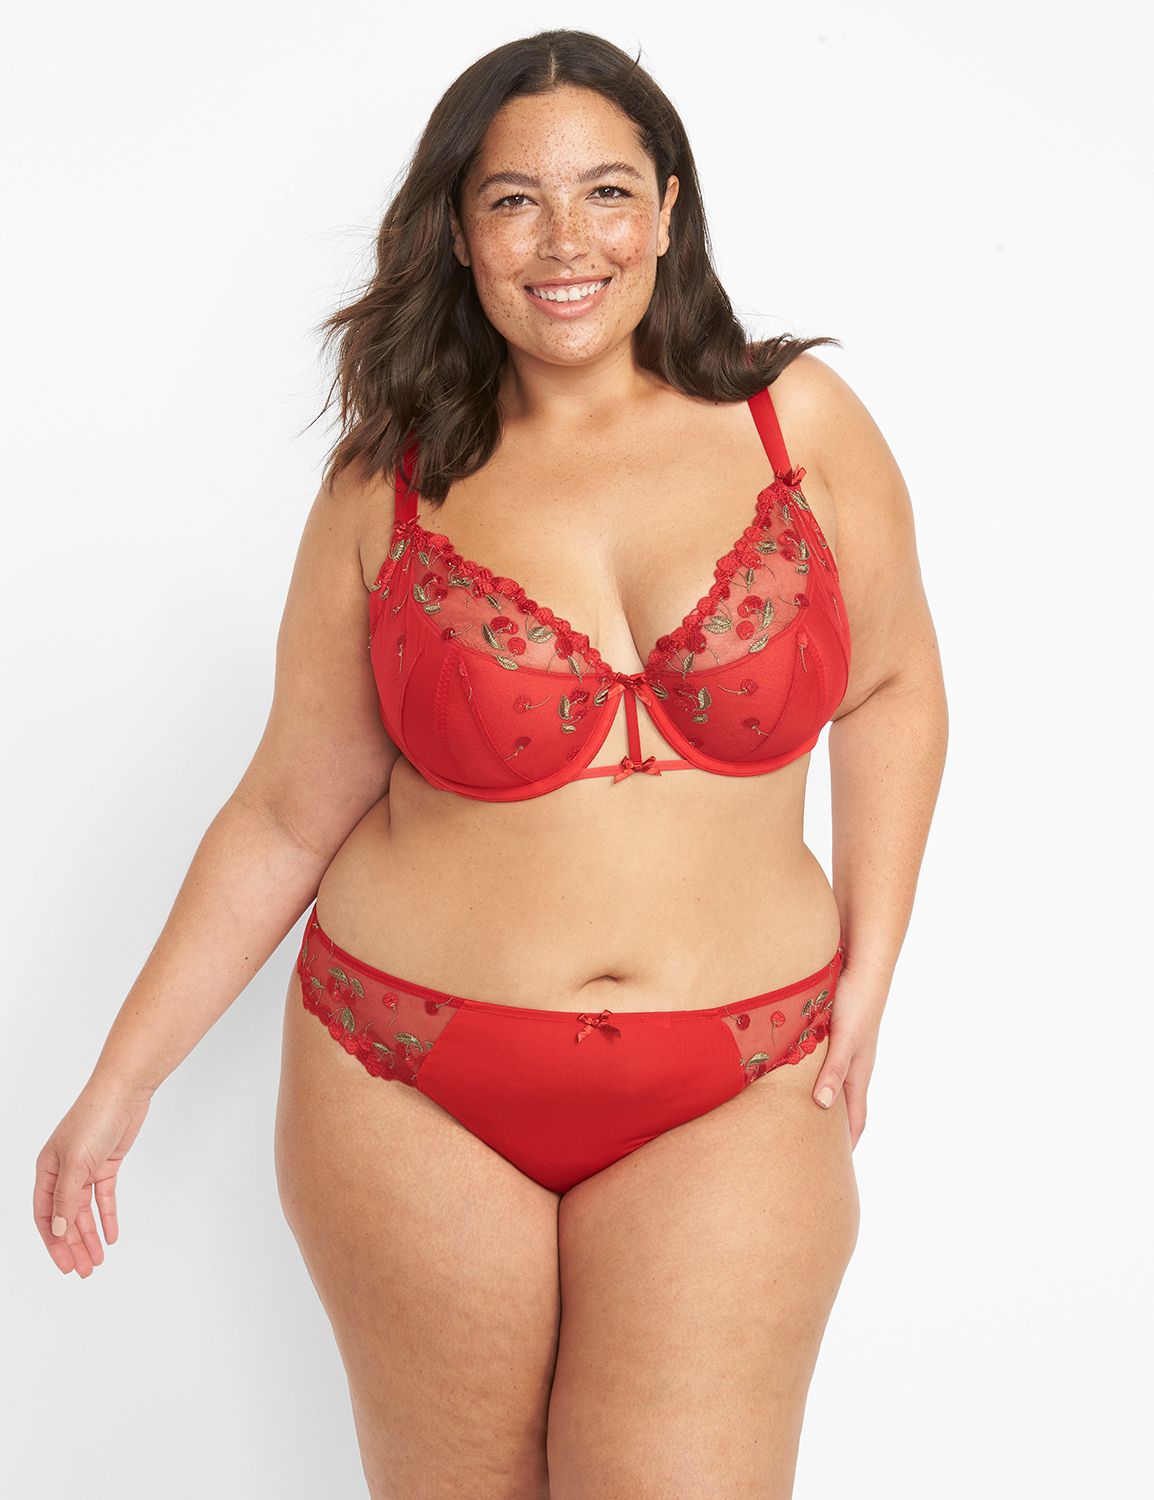 Skinnende Evne cabriolet Supportive Plus Size Bras For Women | Cacique